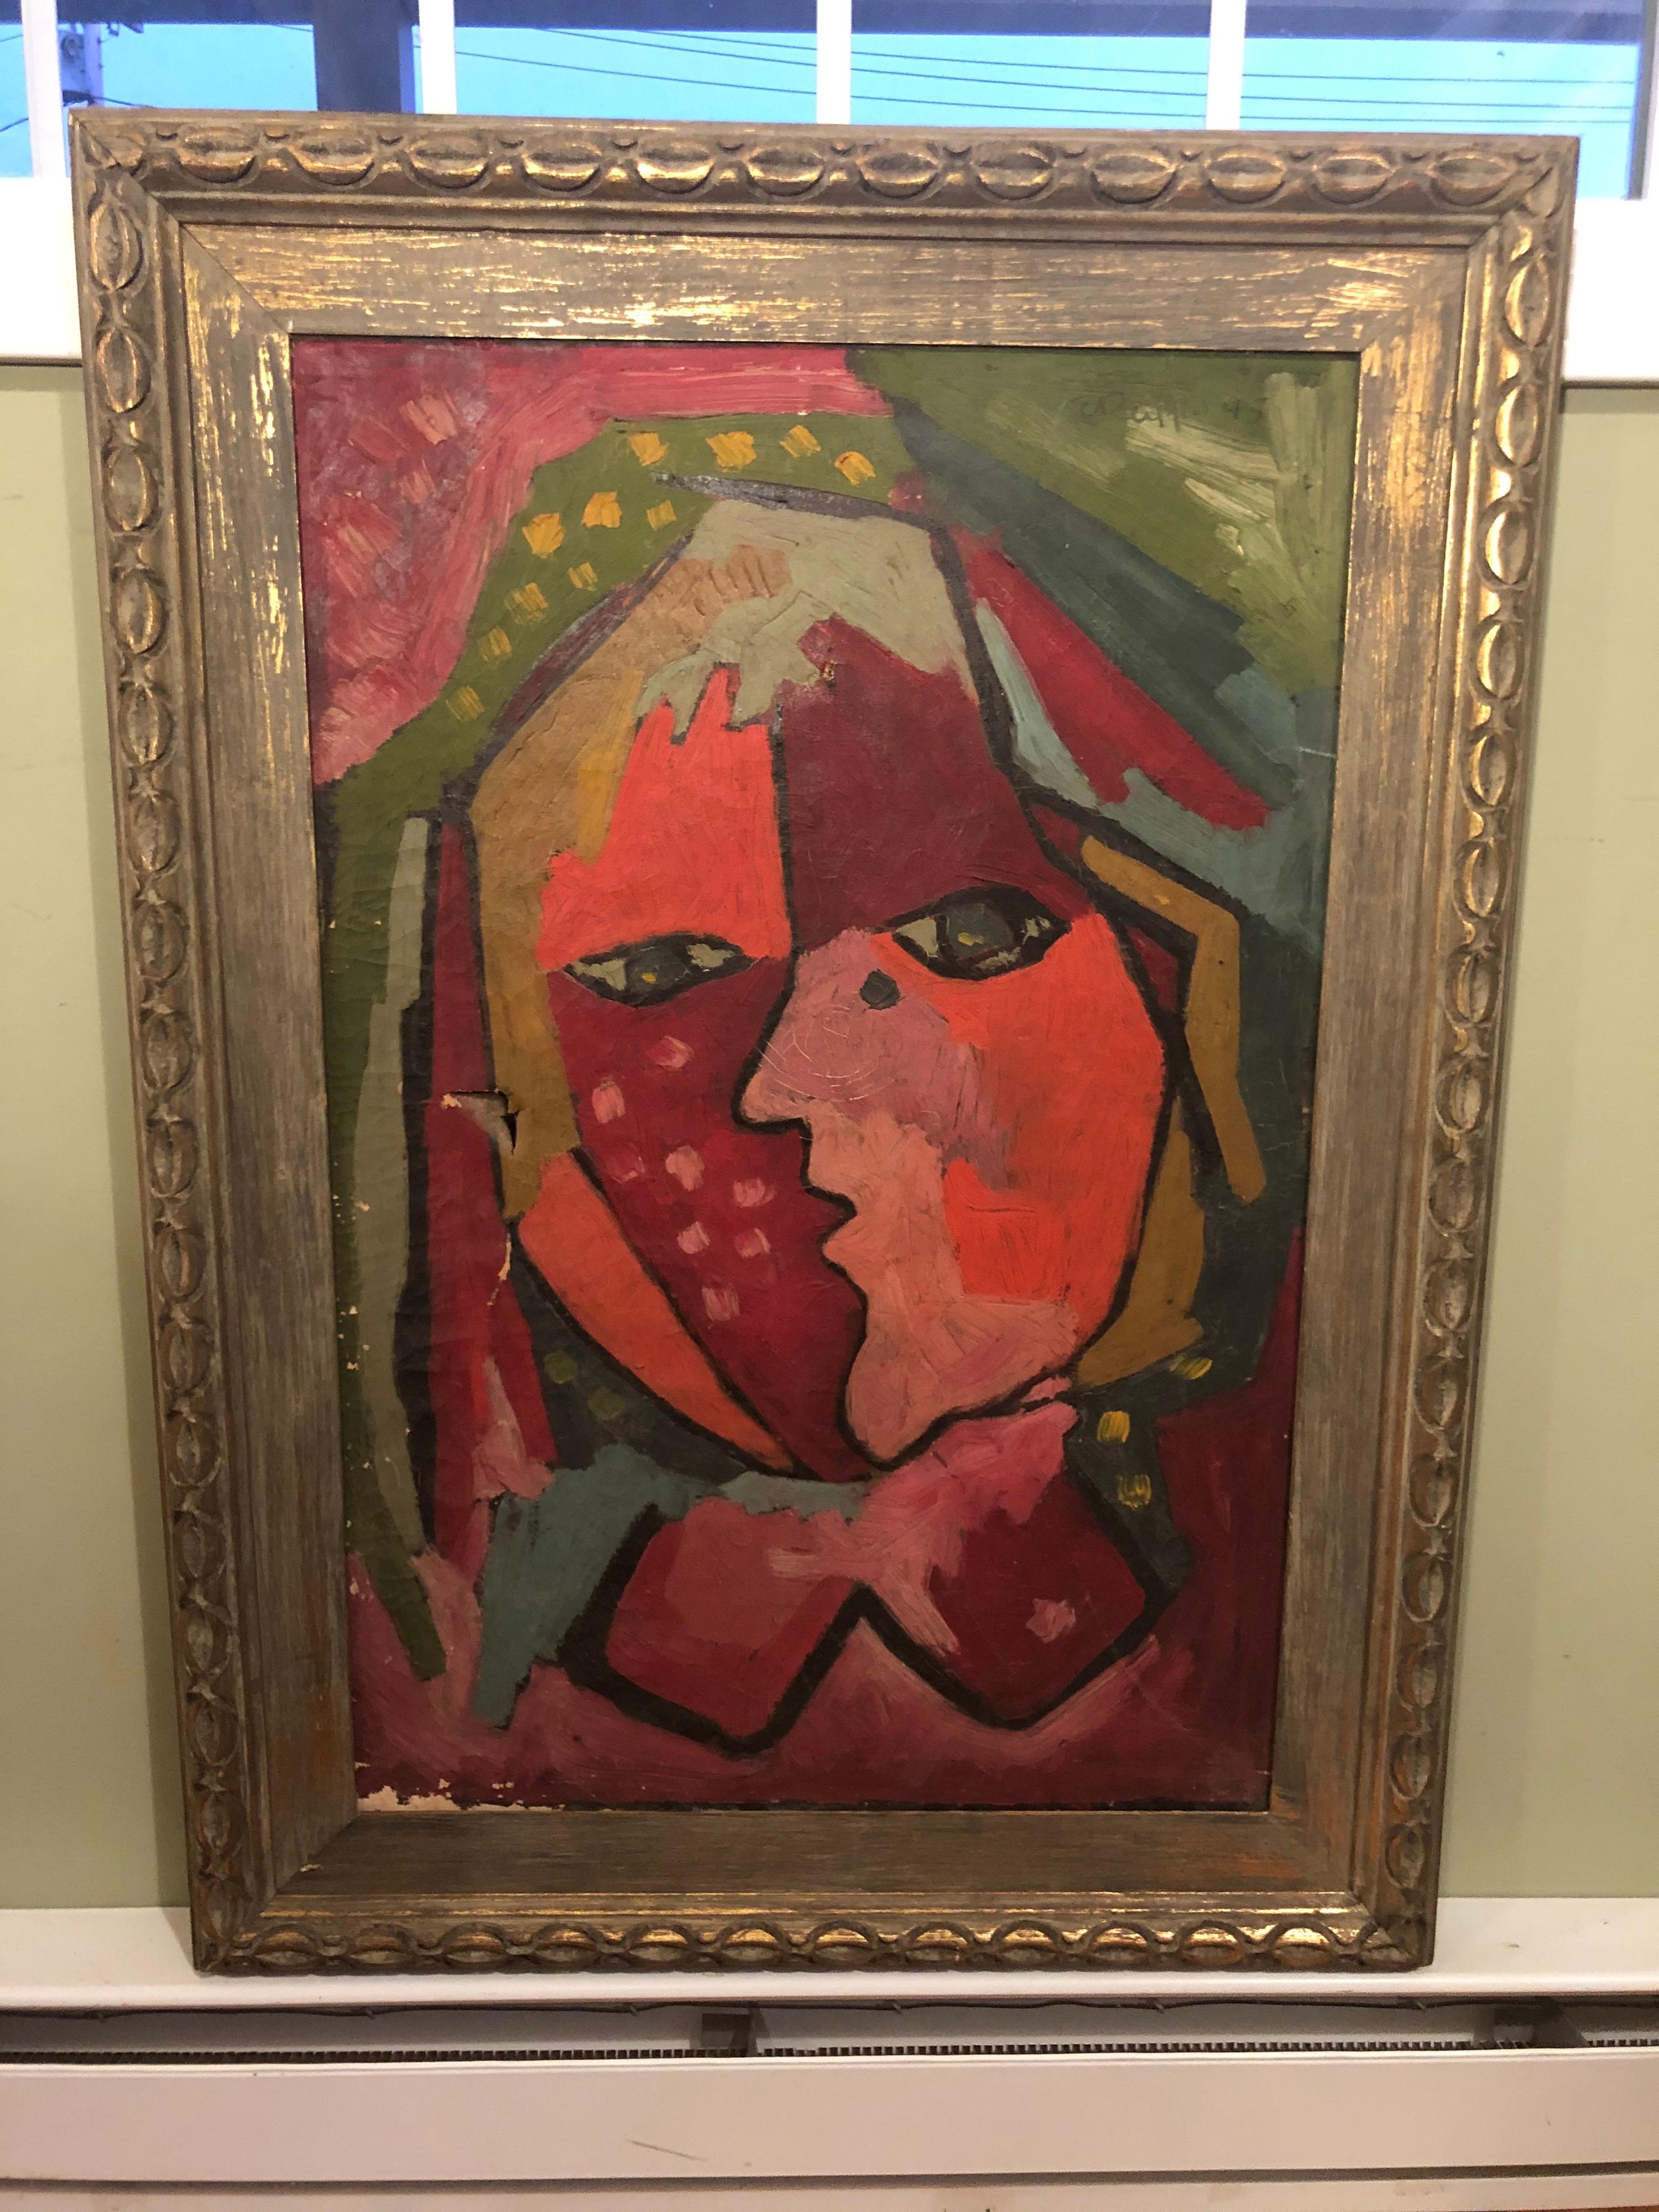 Mid Century Modern Picasso style Abstract of a face by E.Ruff 1945.
Amazing composition and color. Nice gilt frame. One small tear can be repaired.